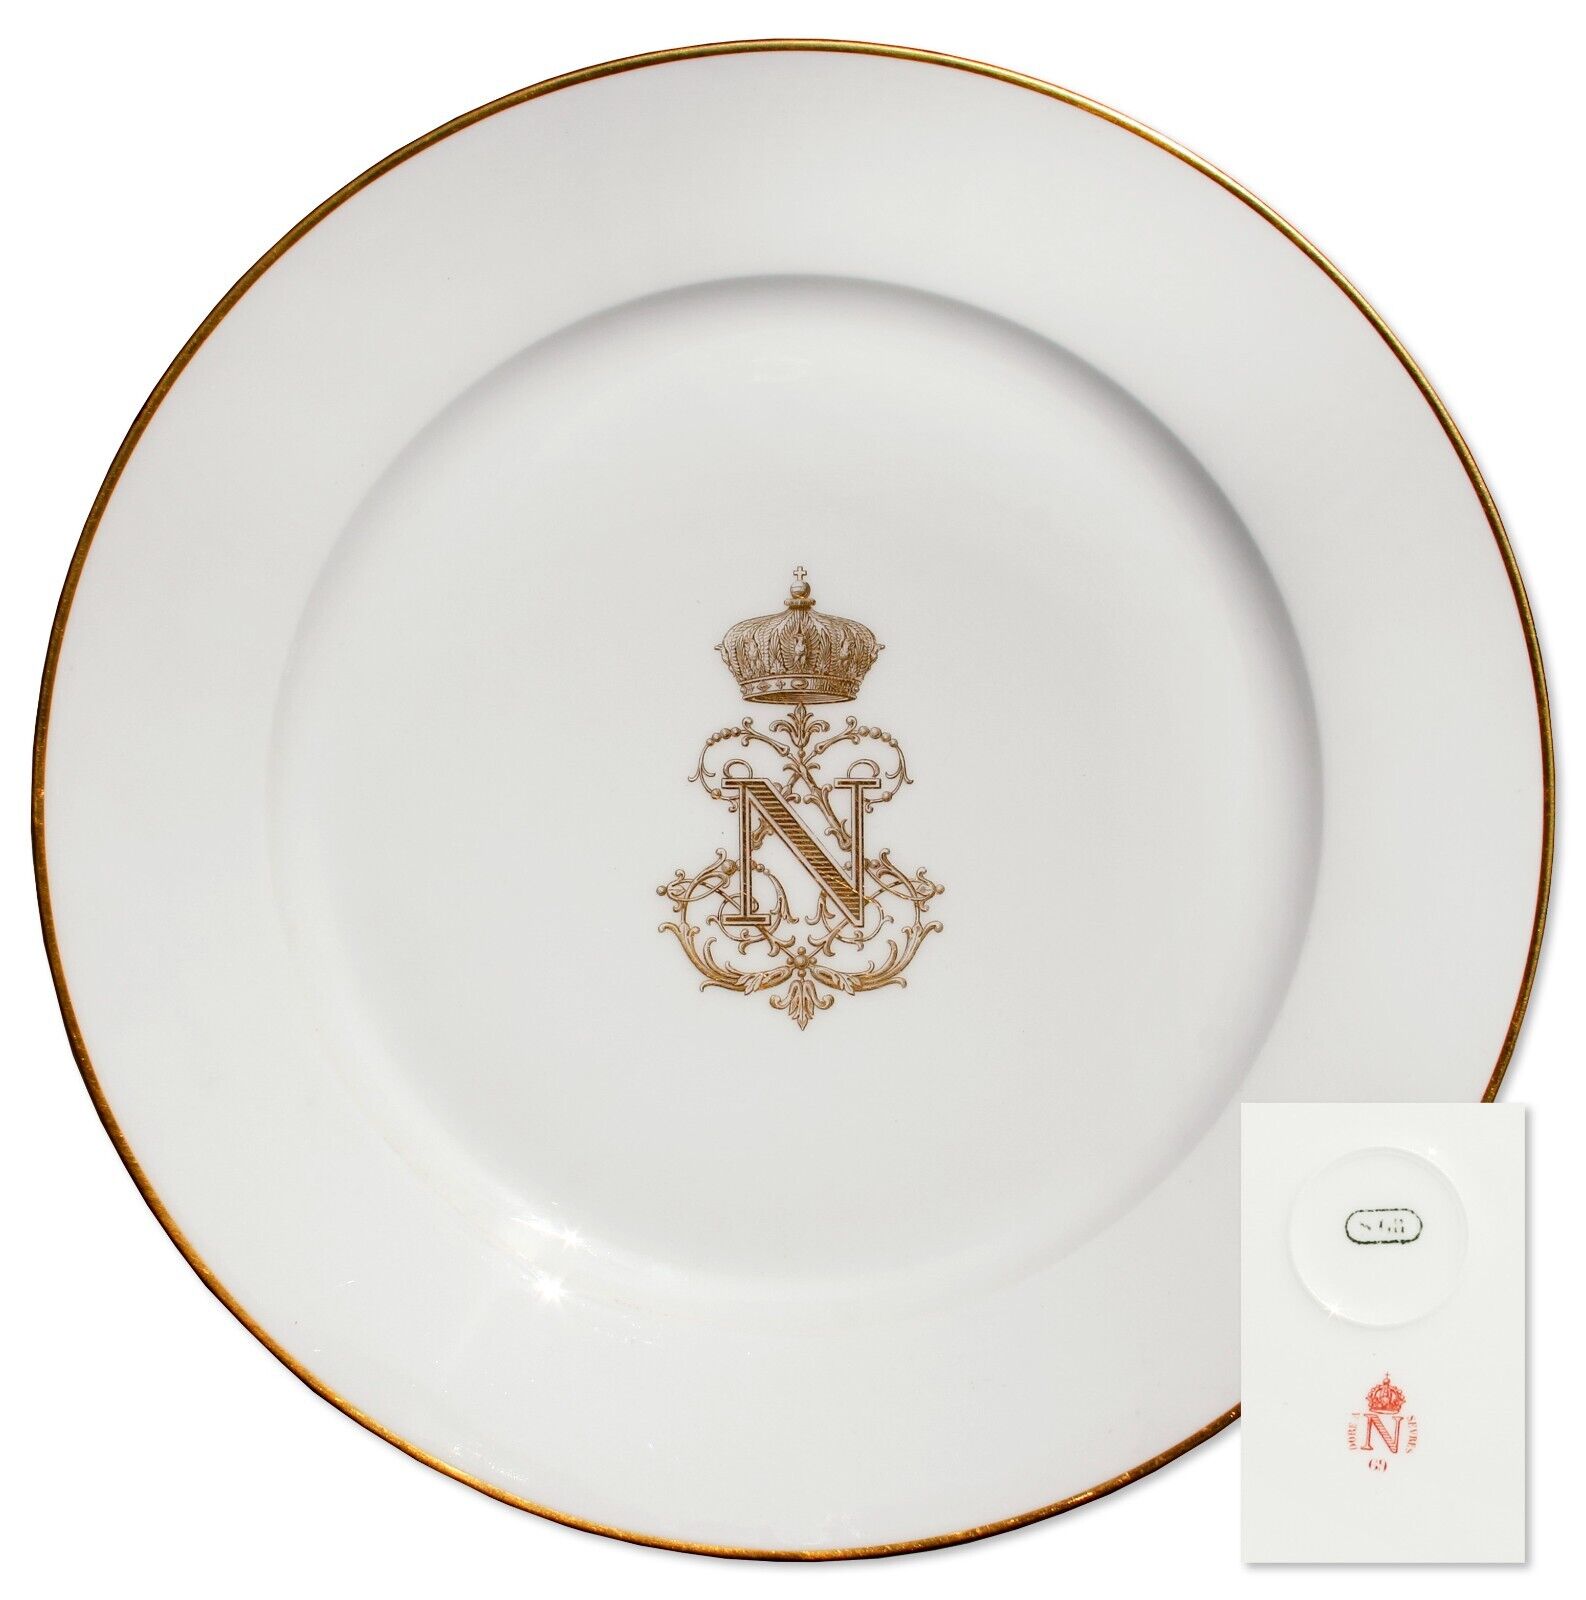 Napoleon III Royal China Plate From Tuileries Palace